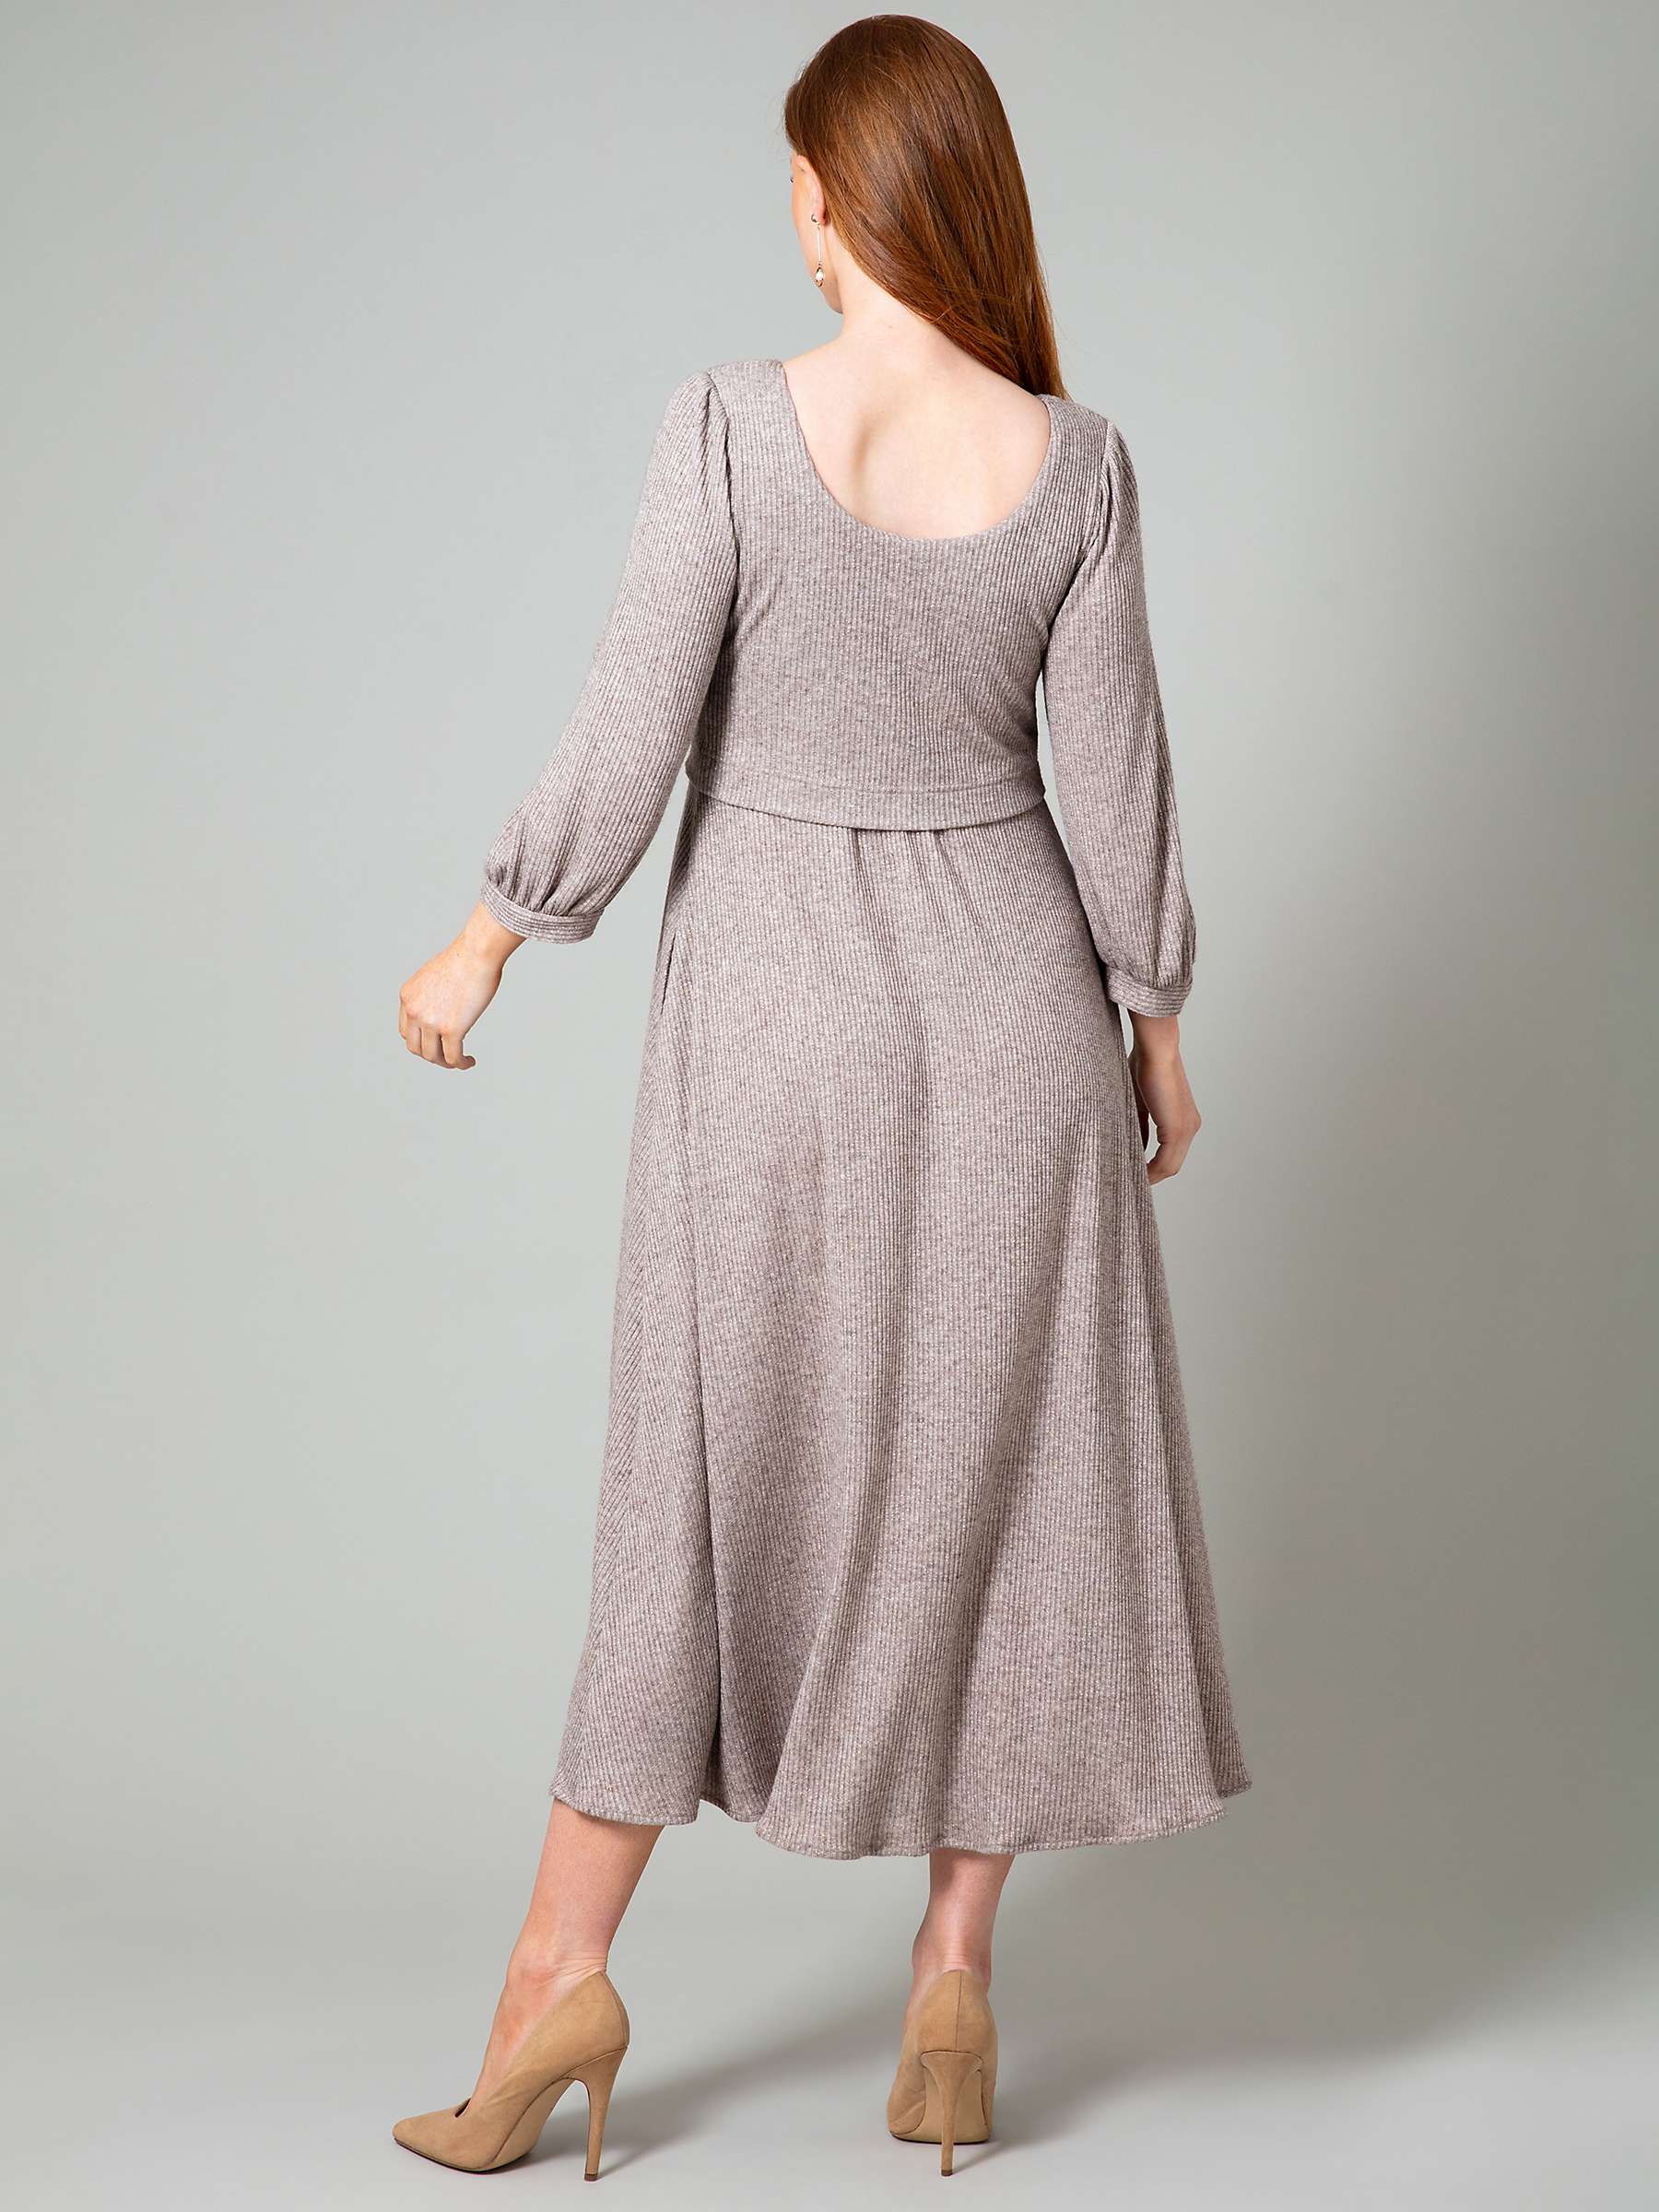 Buy Tiffany Rose Vivian Maternity Ribbed Jersey Dress, Sparkle Chocolate Online at johnlewis.com